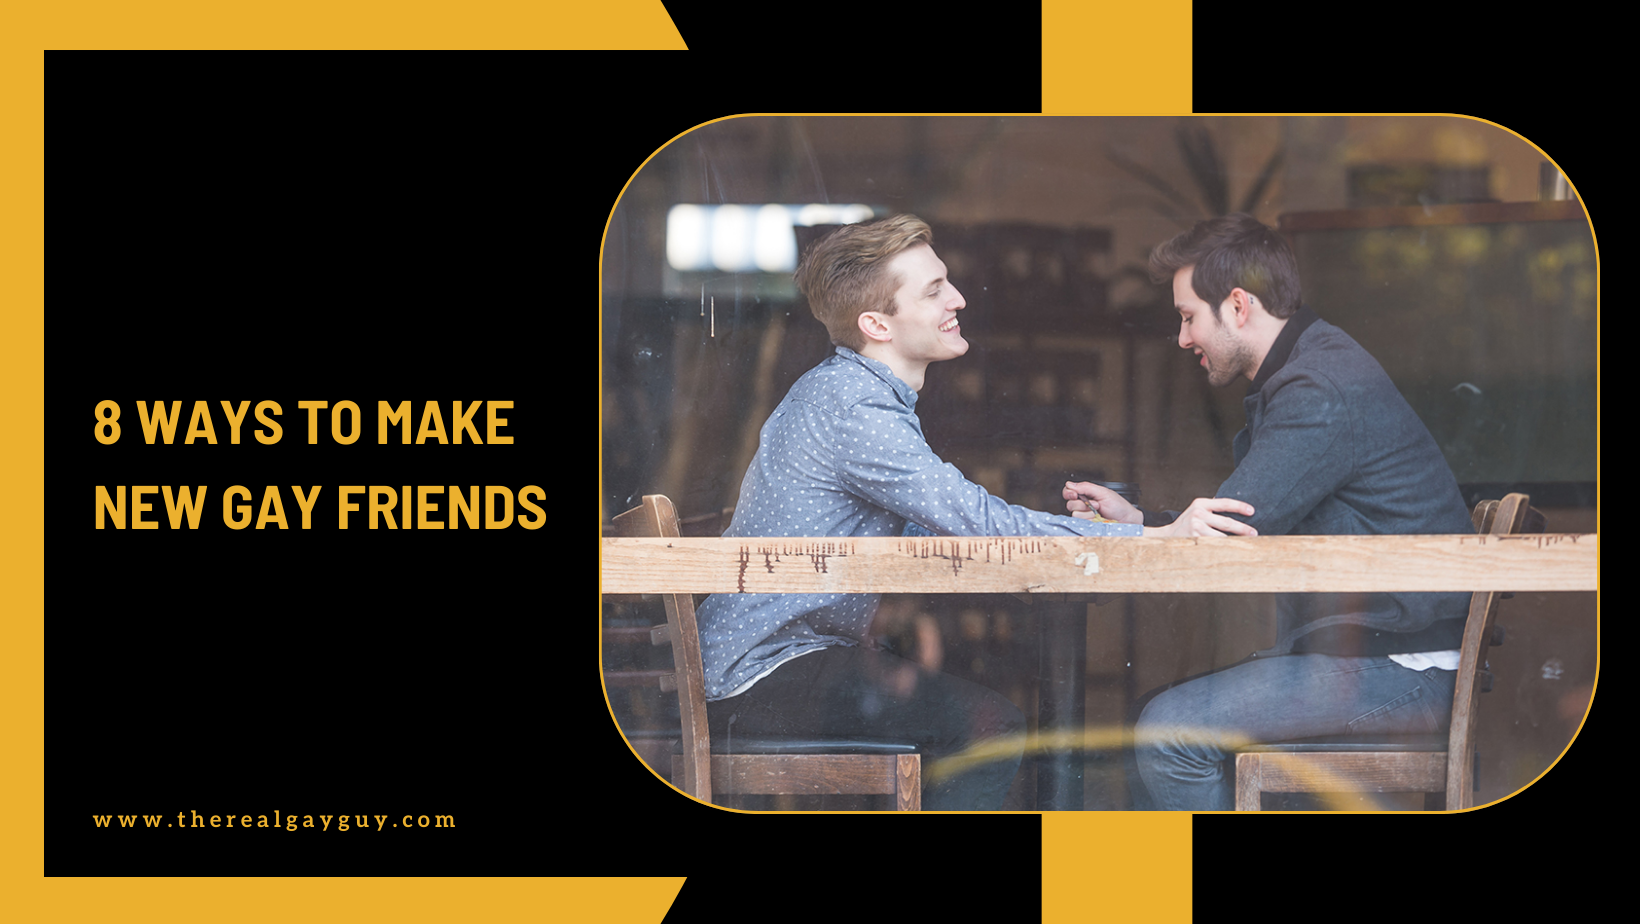 8 Ways to Make New Gay Friends